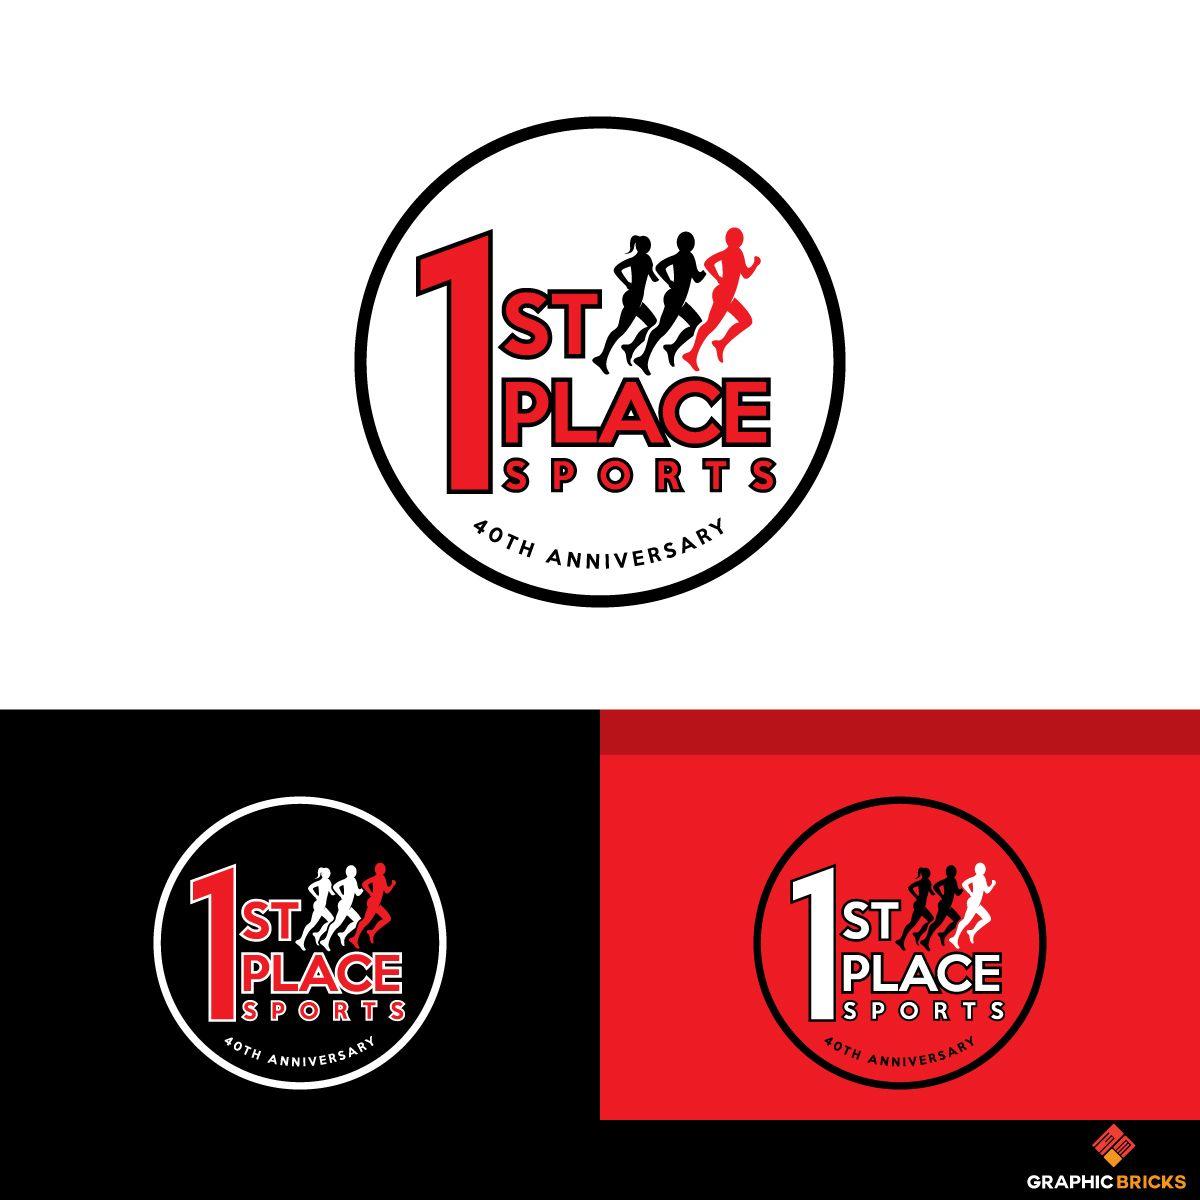 1st-place Logo - Logo Design for 1st Place Sports Years Running or 40th